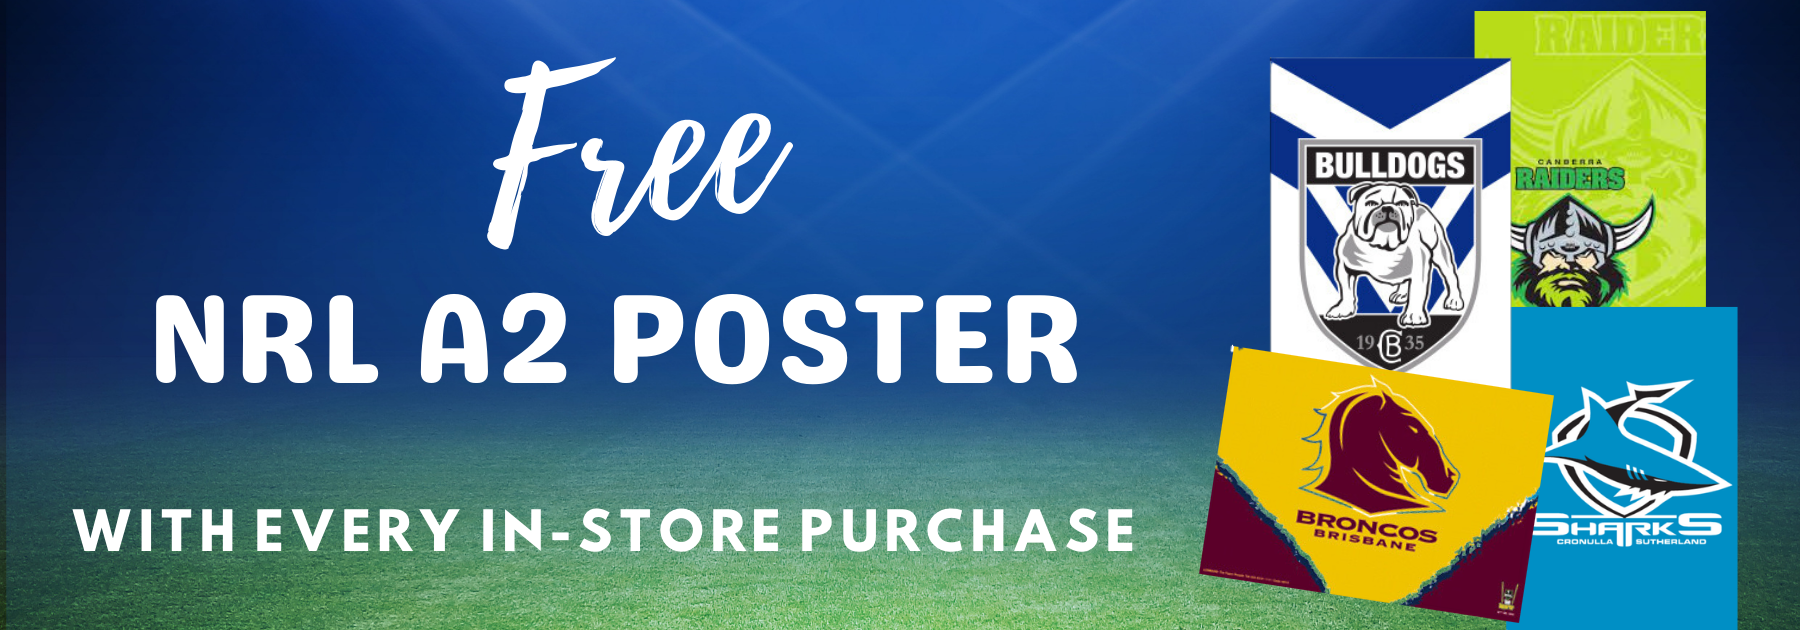 FREE A2 NRL POSTER